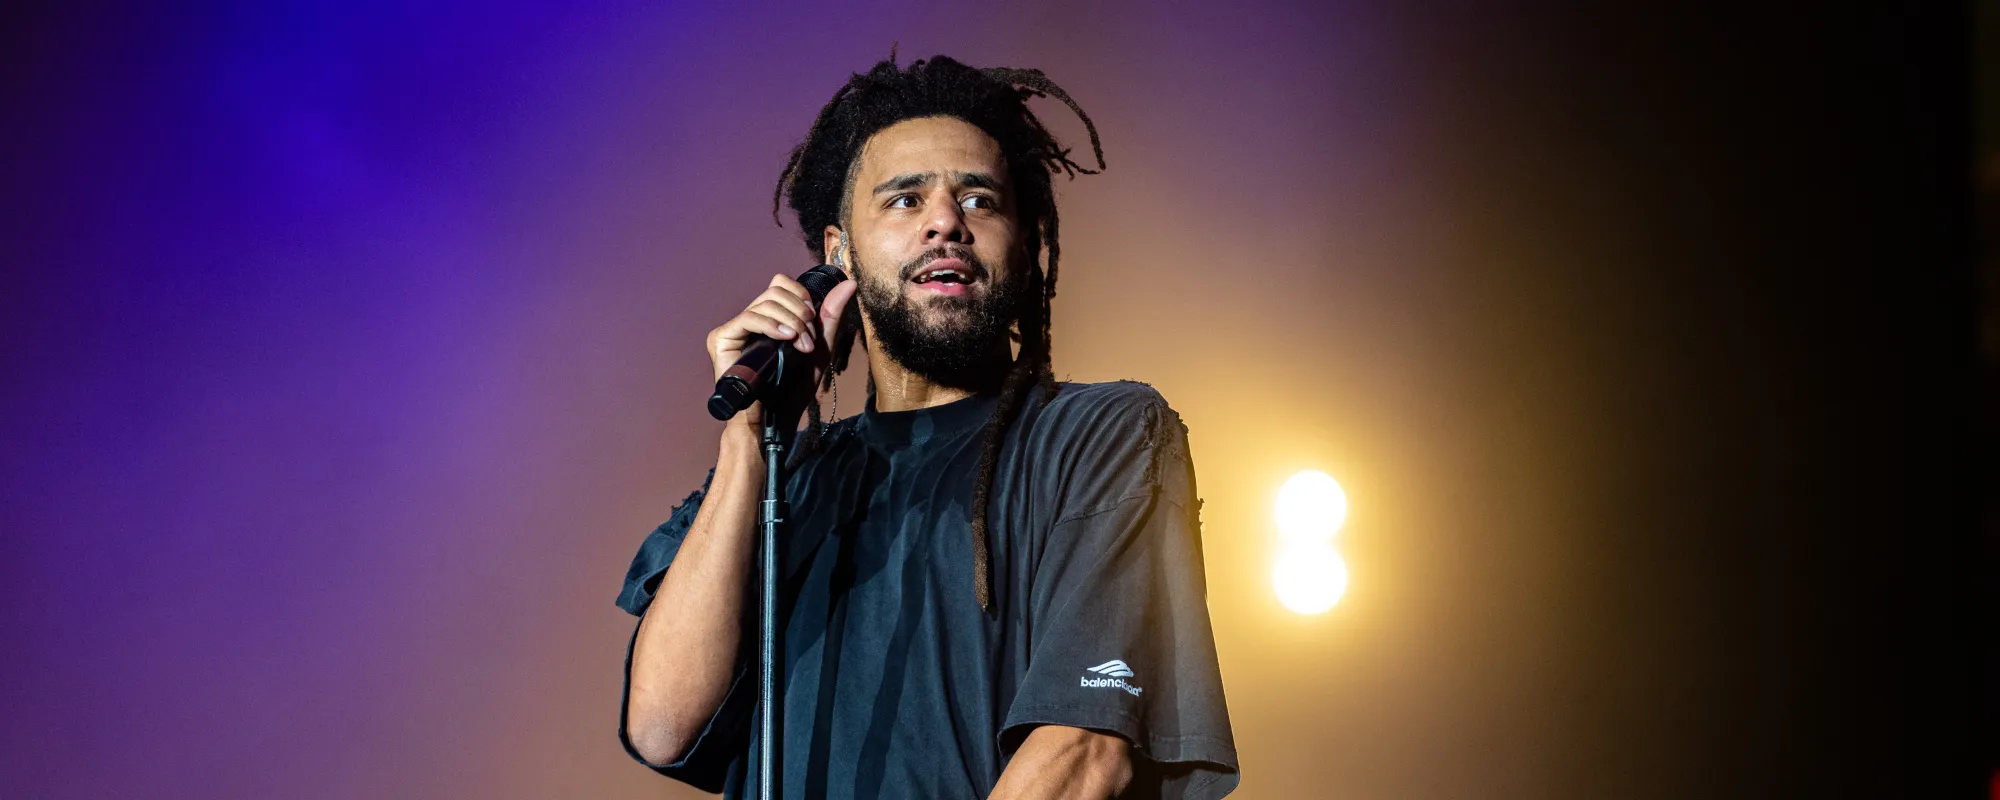 J. Cole Confirms New Album ‘The Fall Off’ In the Works